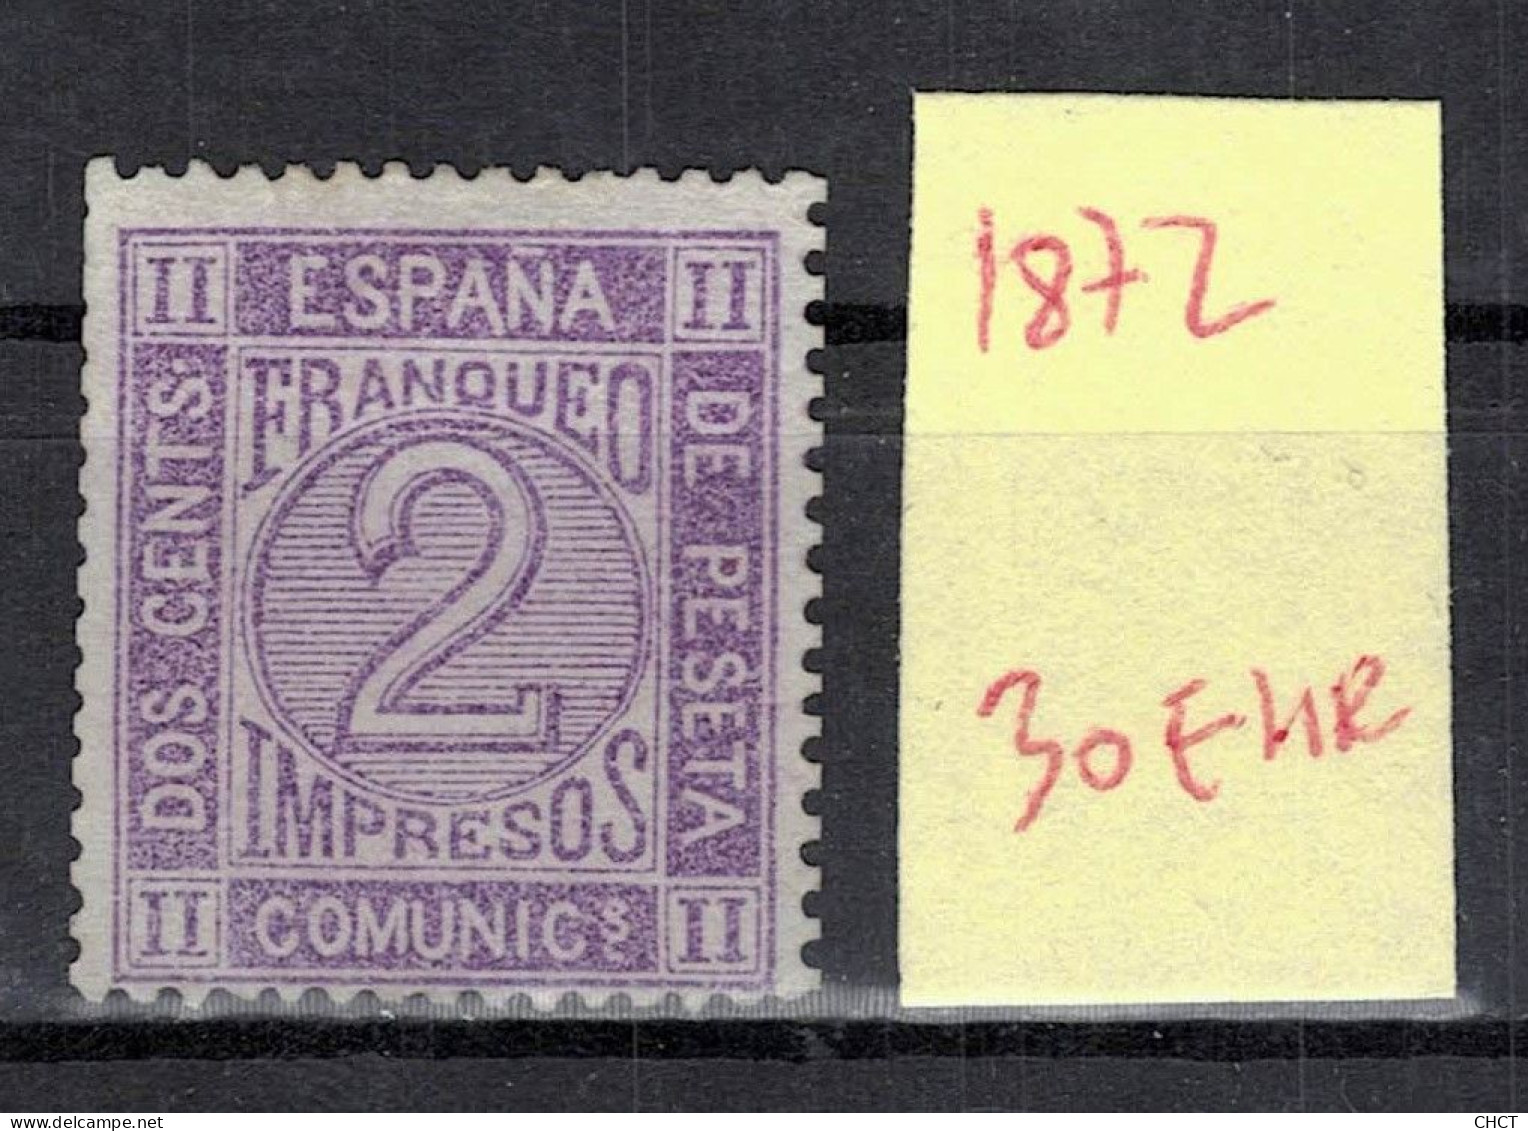 CHCT58 - Franqueo, 1872, MH, Spain - Unused Stamps